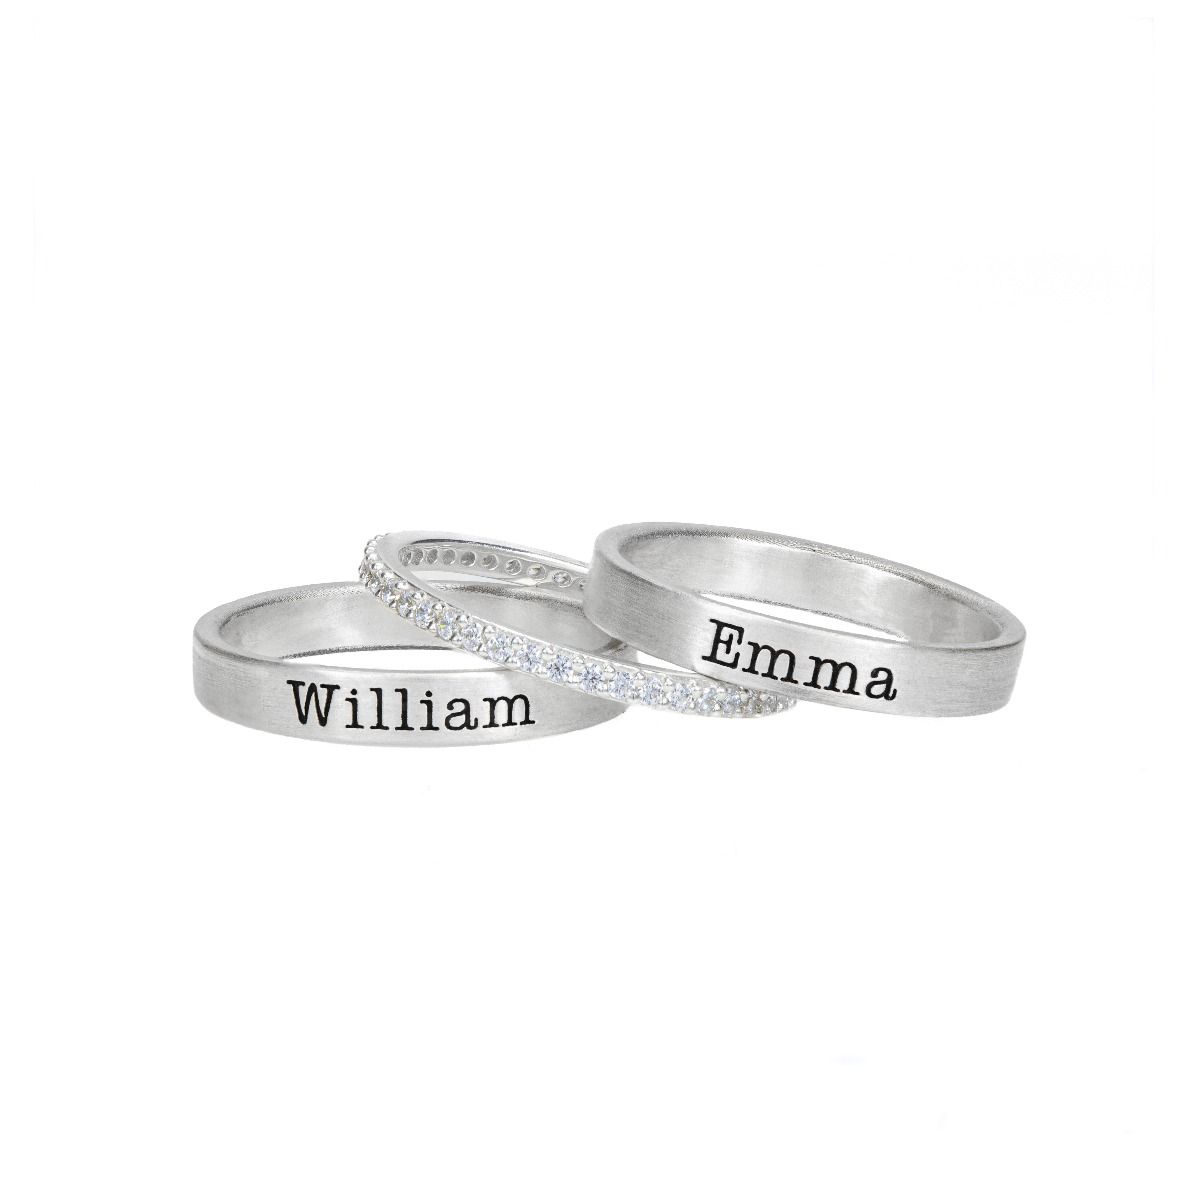 Jewellery Rings Stackable Rings Any Name Sterling Silver Name Ring Stackable Name Rings Jewelry Initial Rings Name Jewelry Christmas Gifts Personalised Name Ring 